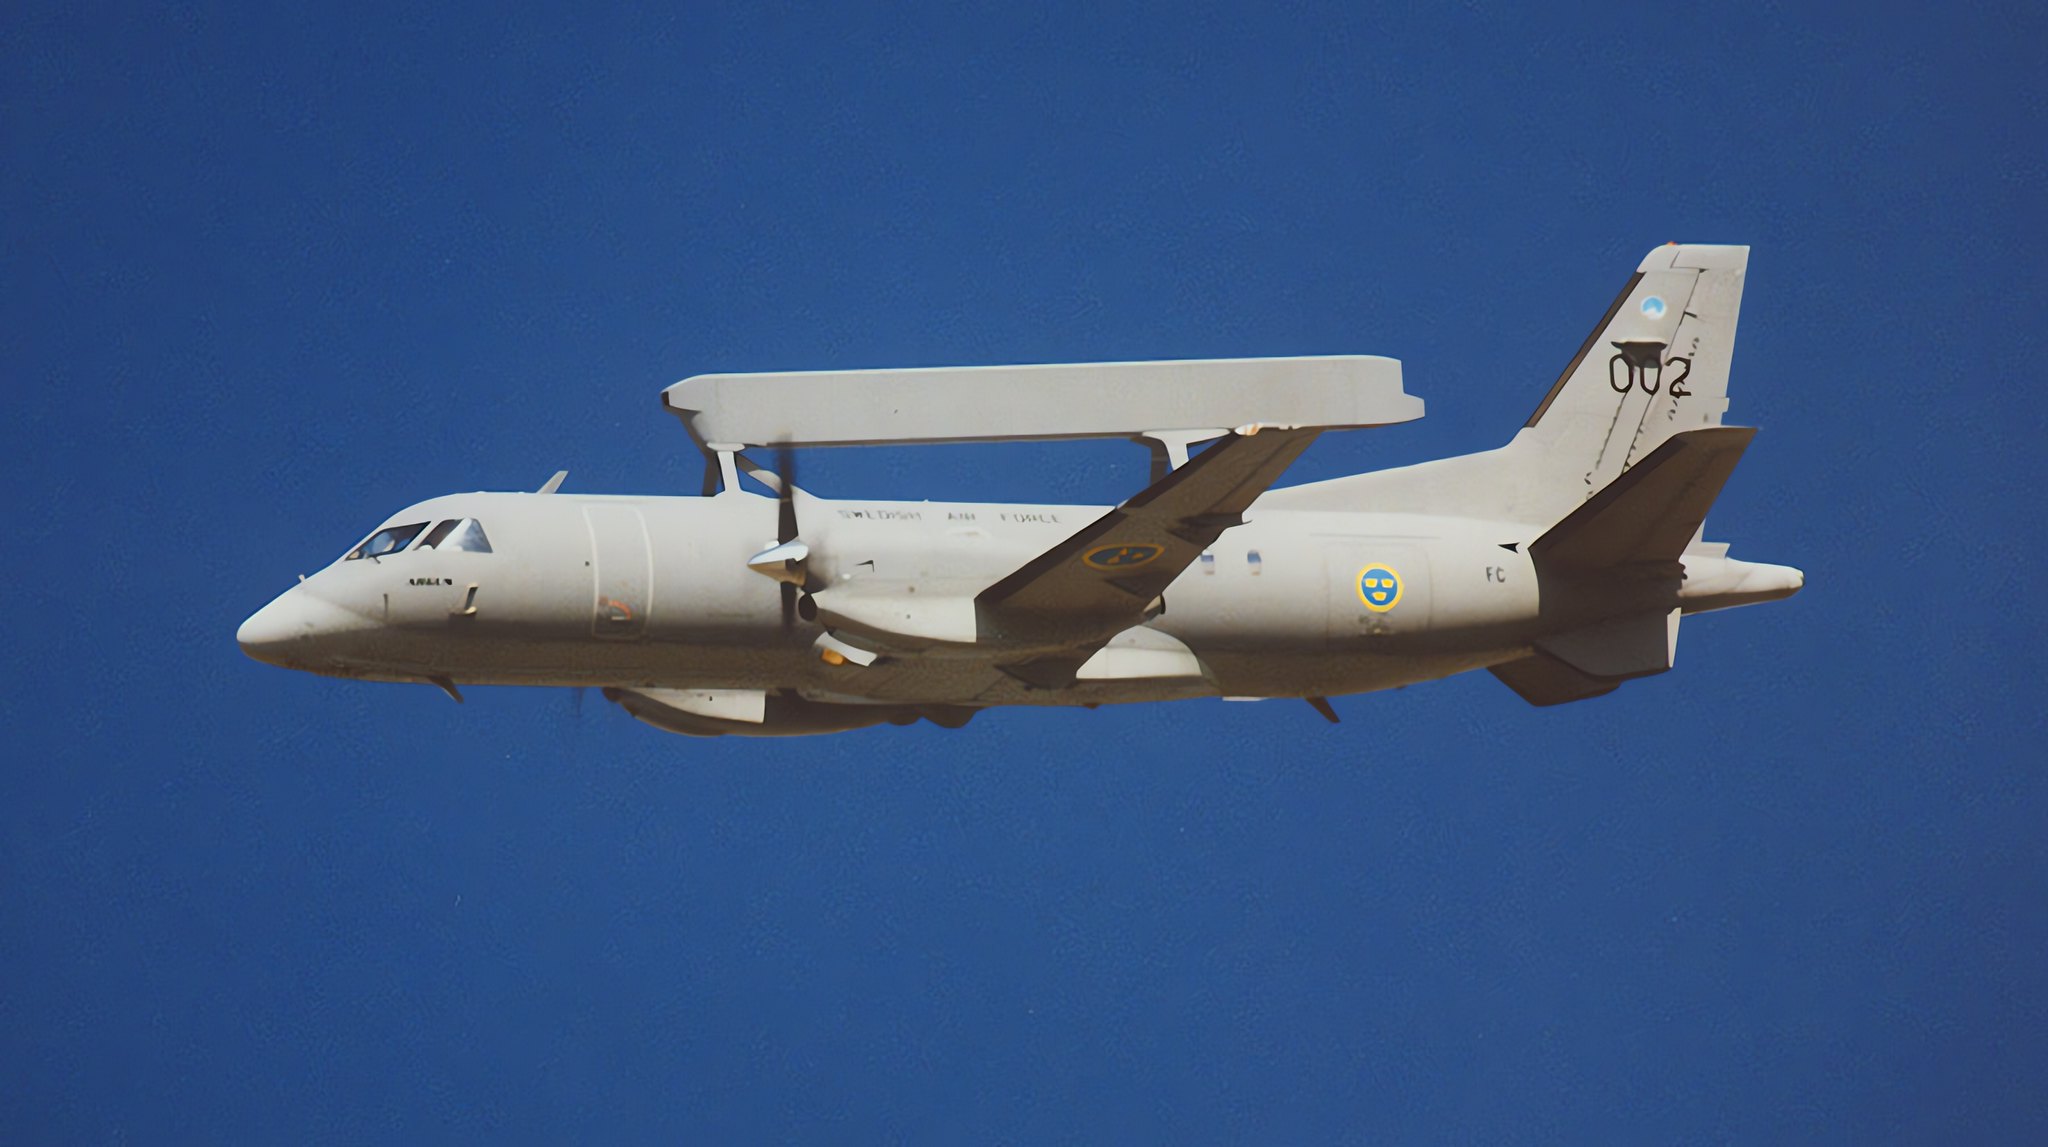 Poland received the second Saab 340B AEW-300 long-range radar detection and control aircraft